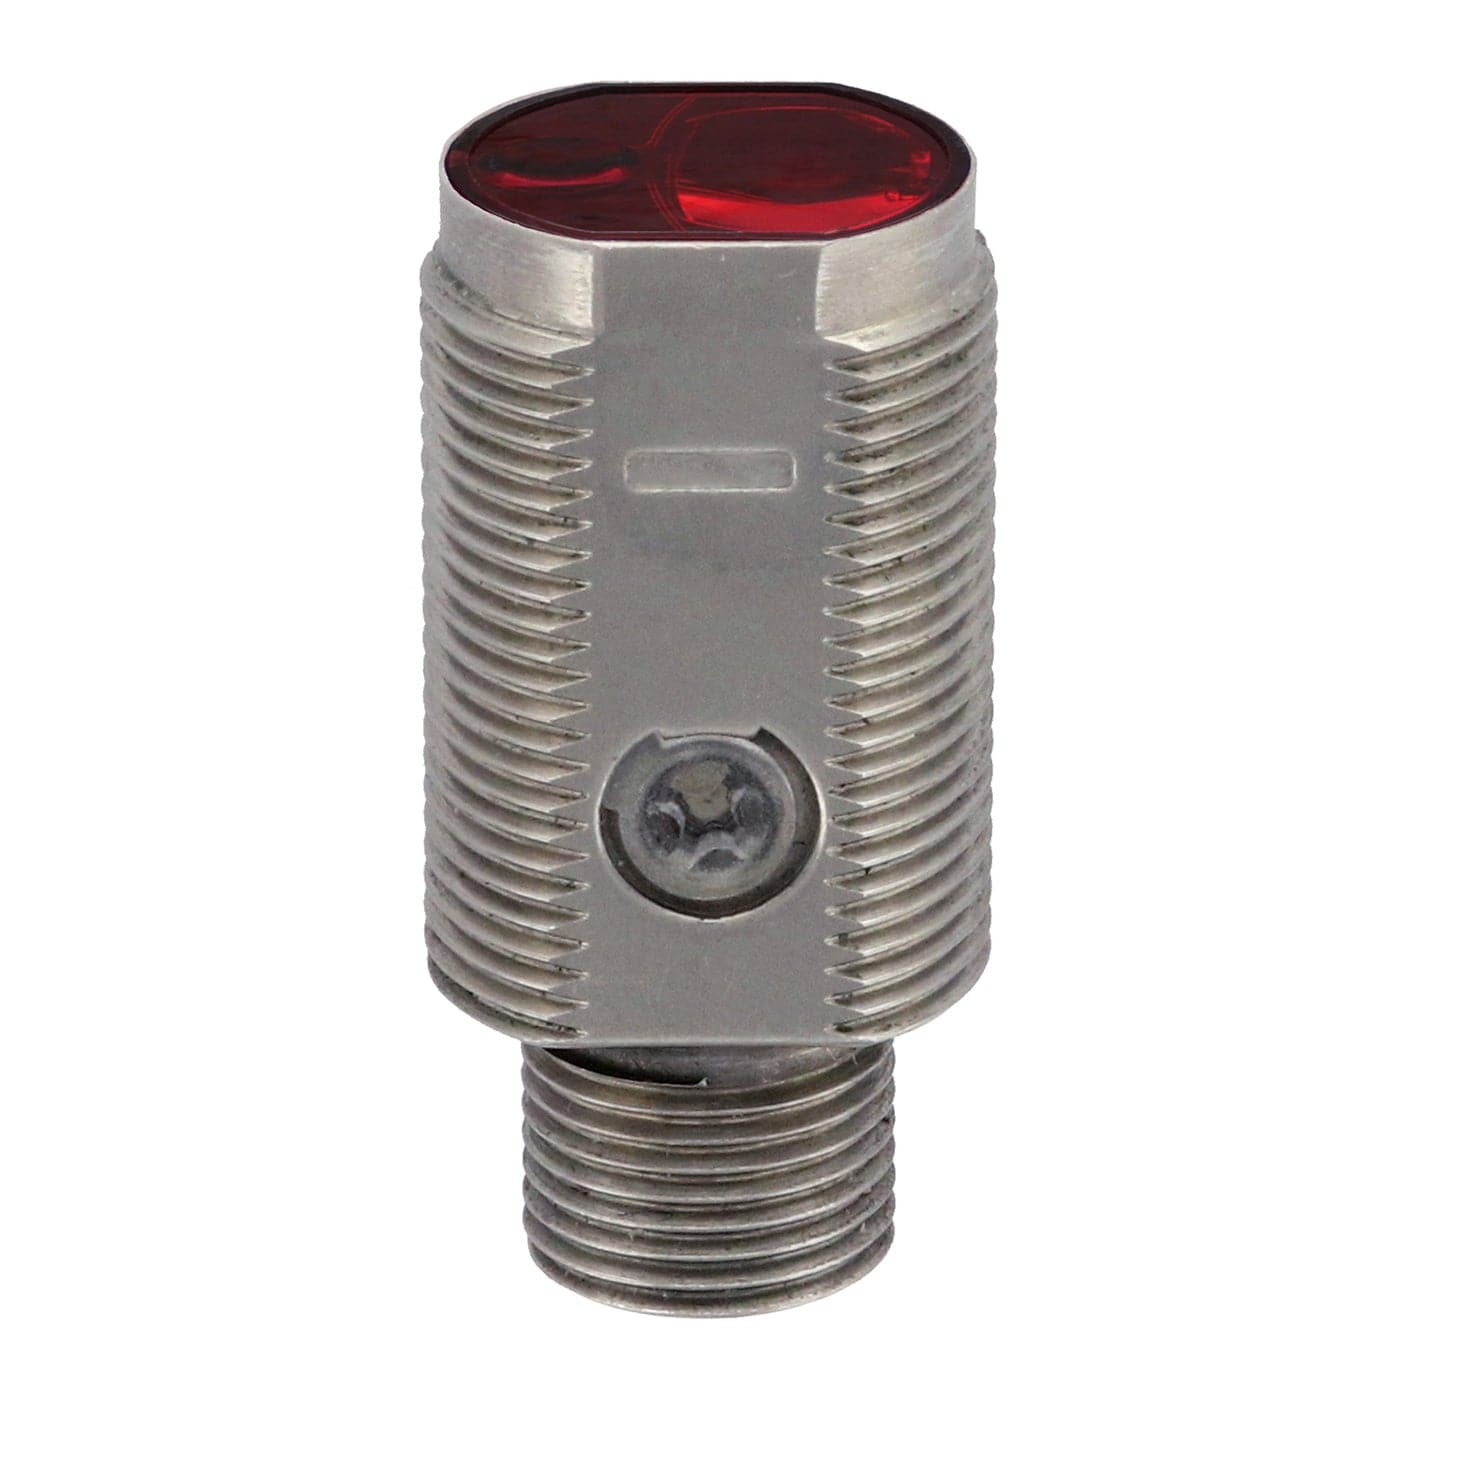 Basic Smart Background suppression 15...210 mm Stainless steel V2A IO Link only Pinpoint LED, red 640 nm